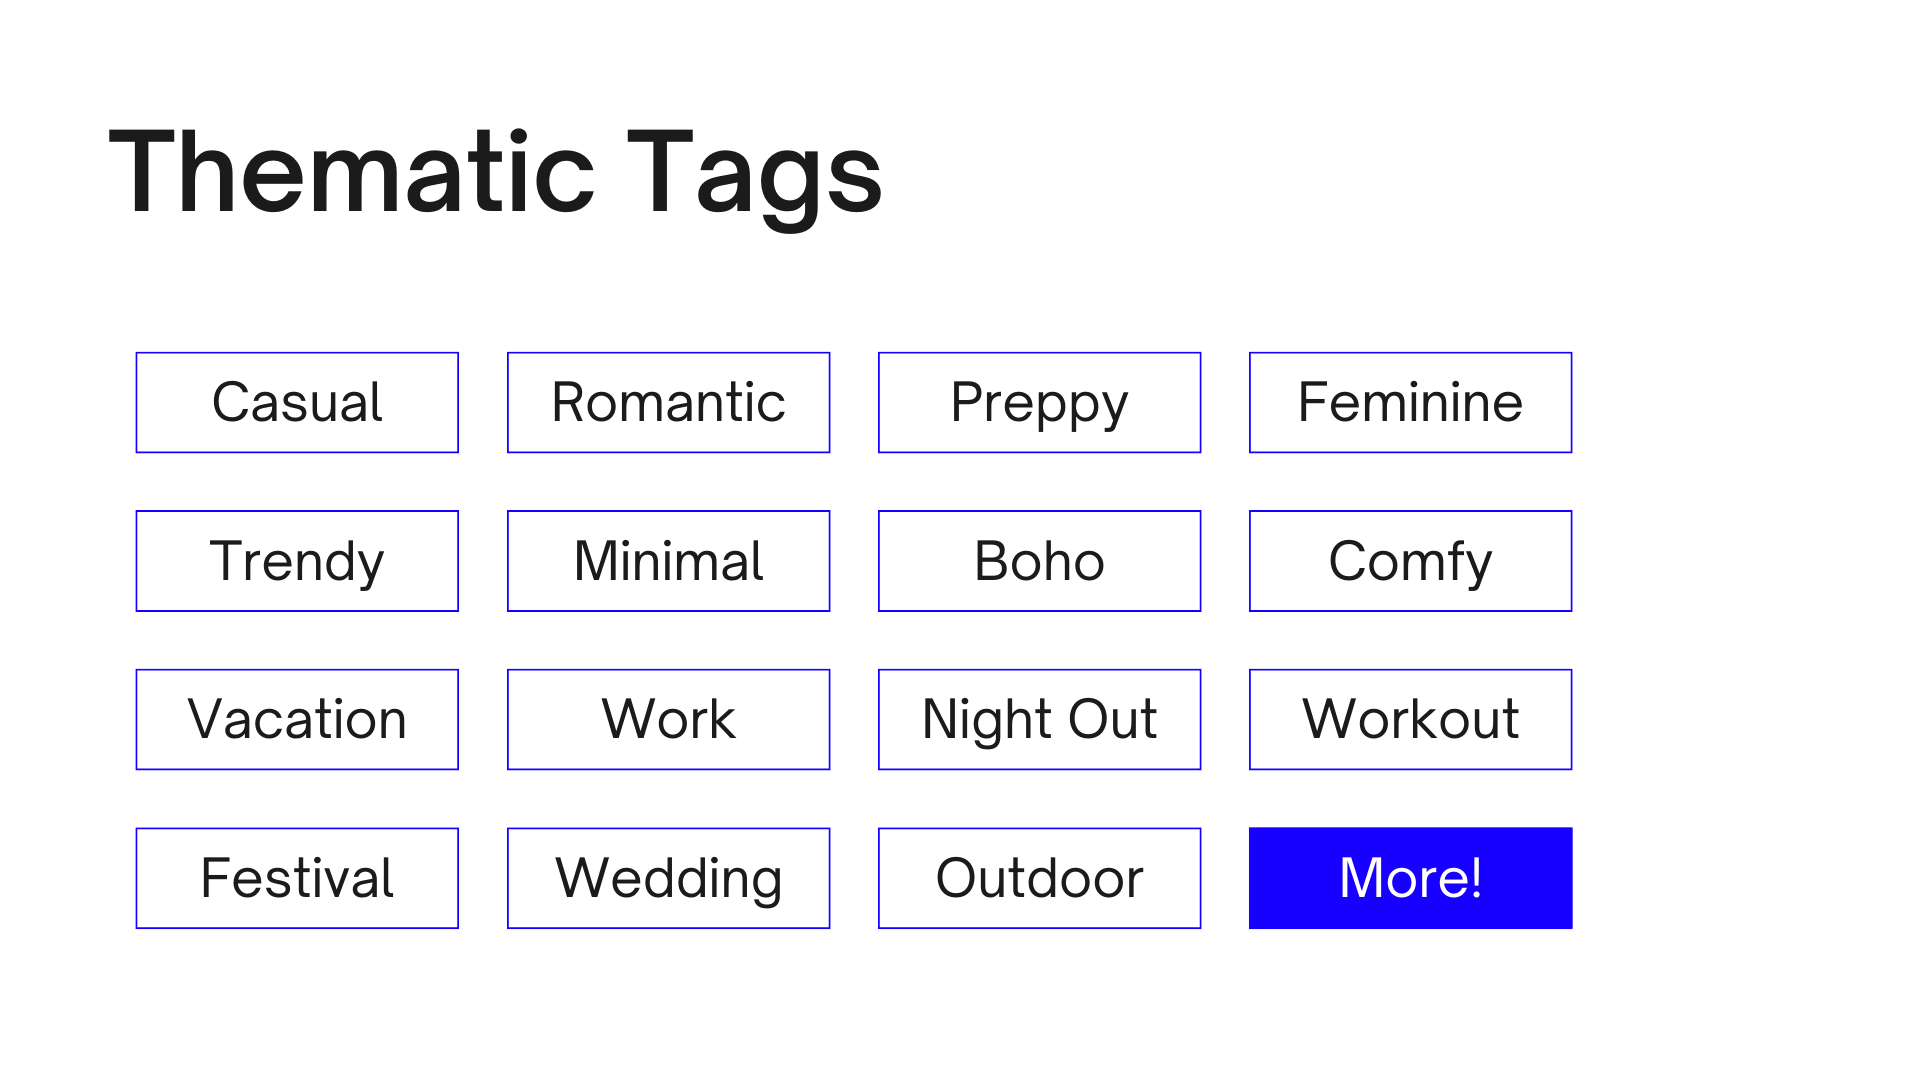 Thematic tags offered by YesPlz AI